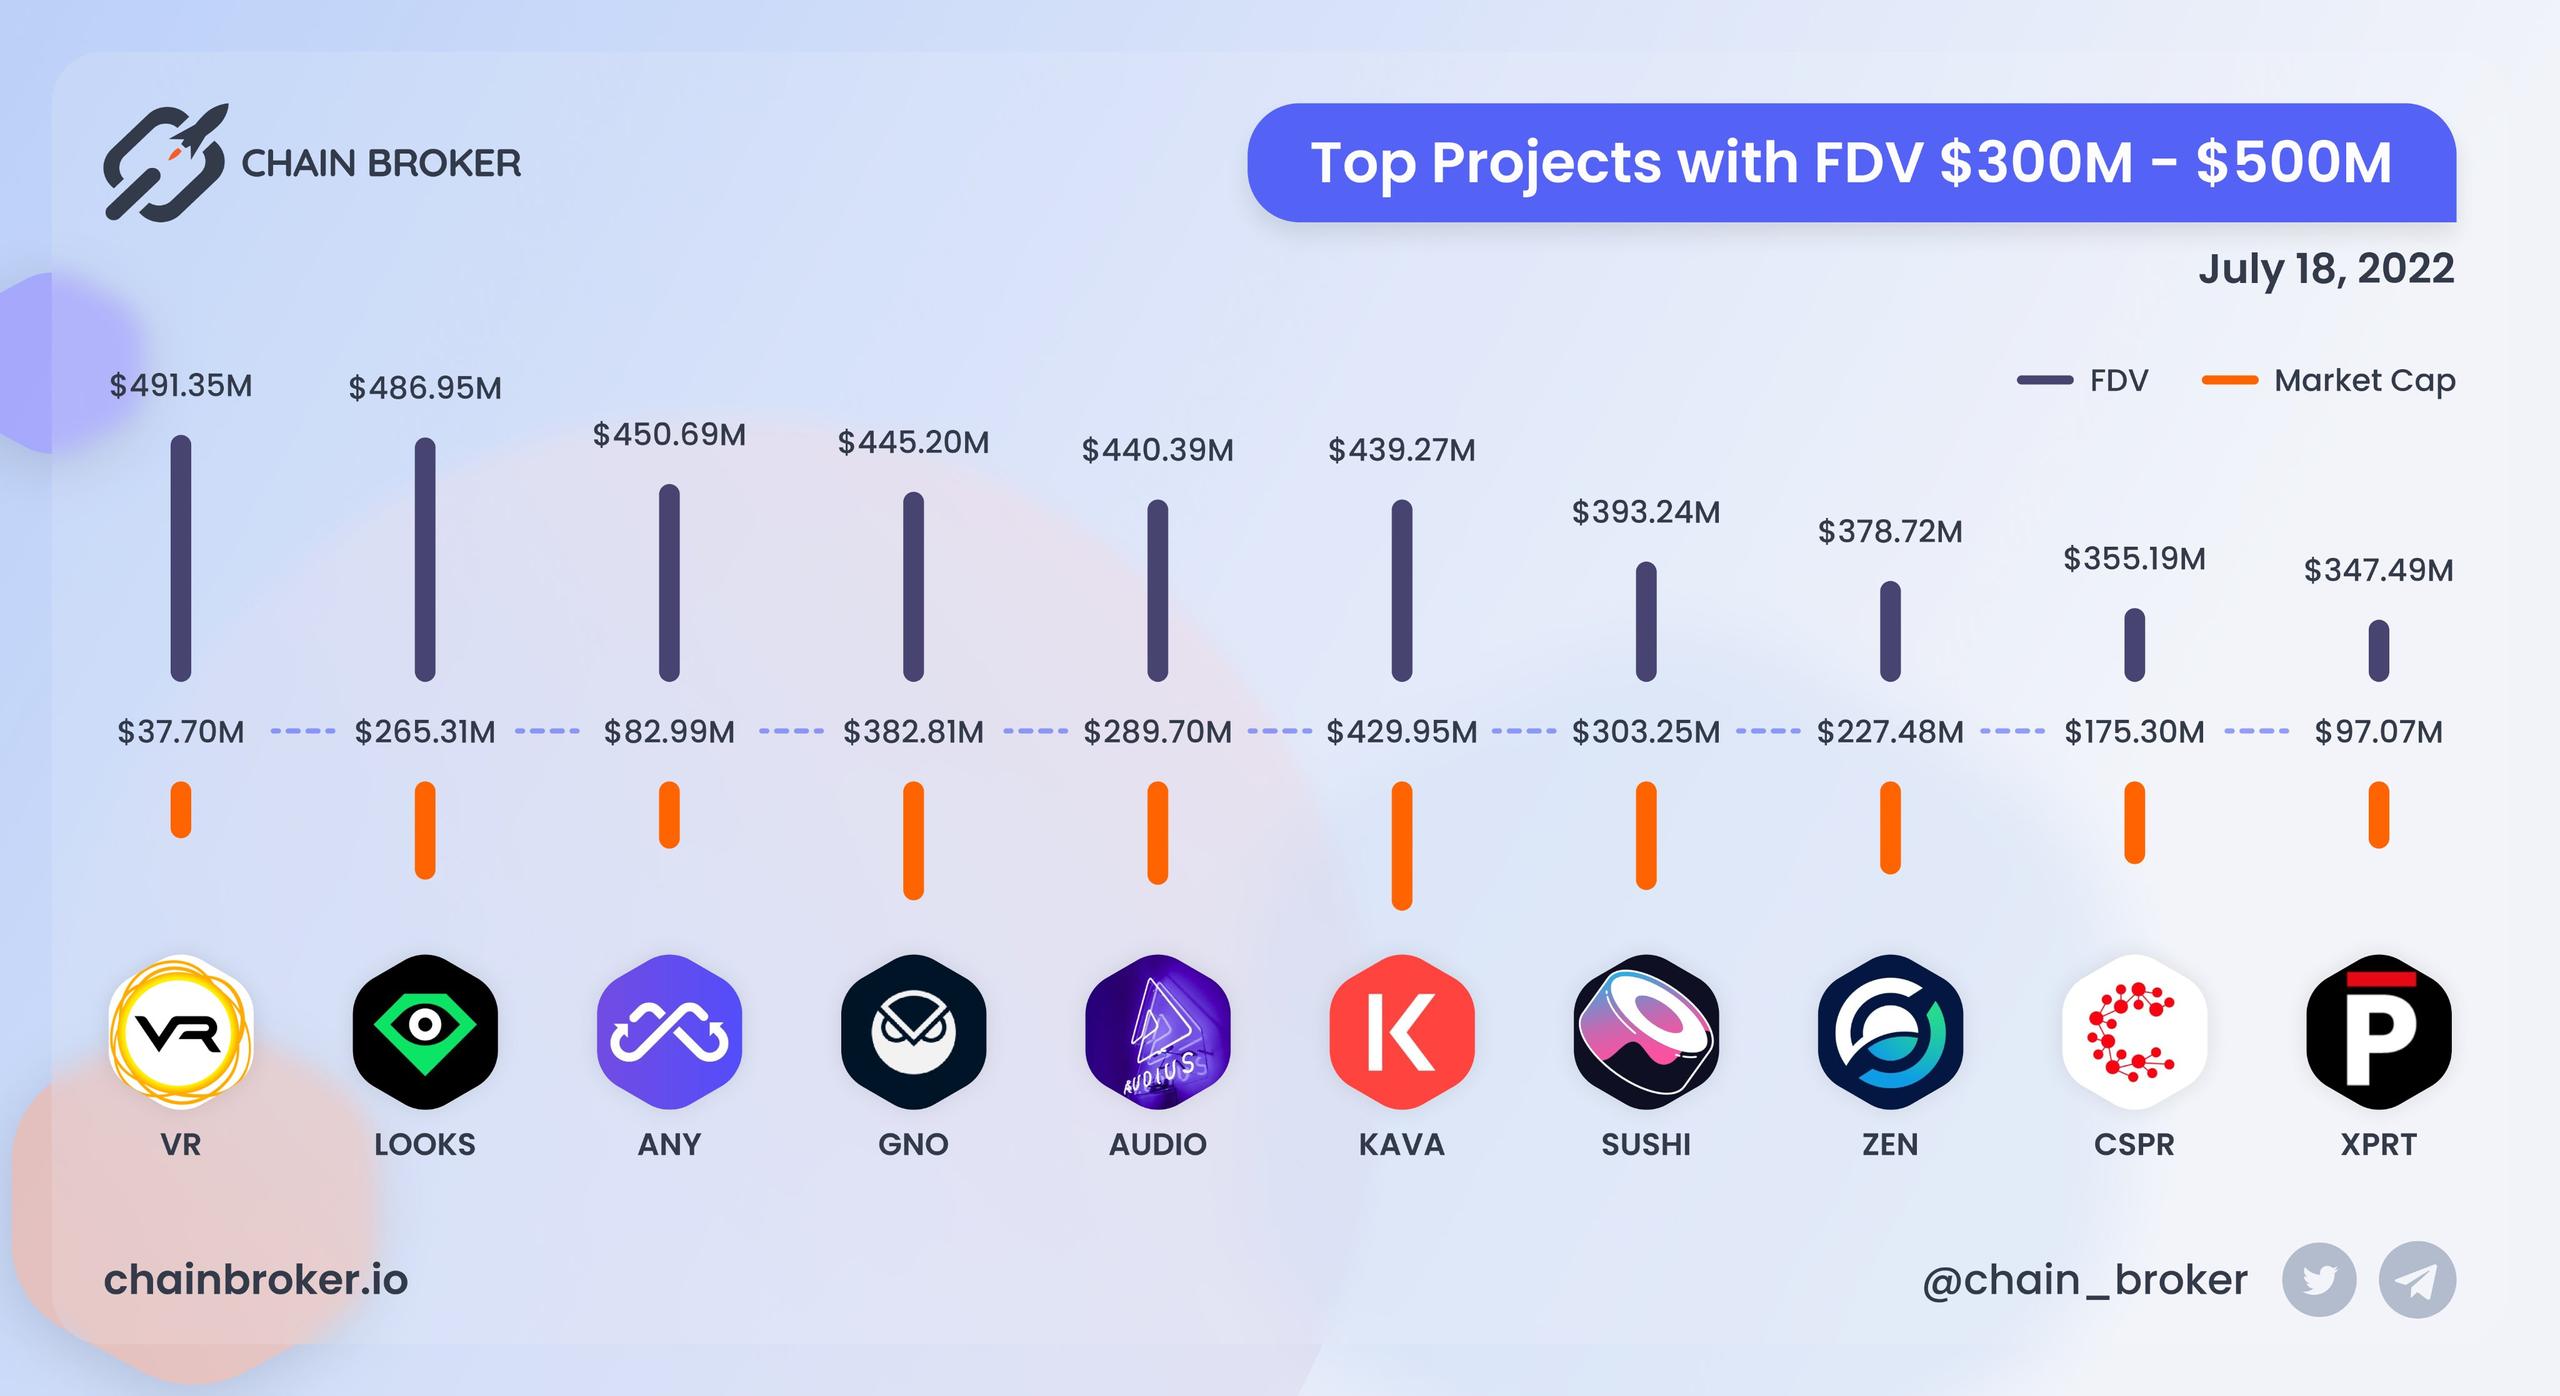 Top projcts with FDV $300M - $500M